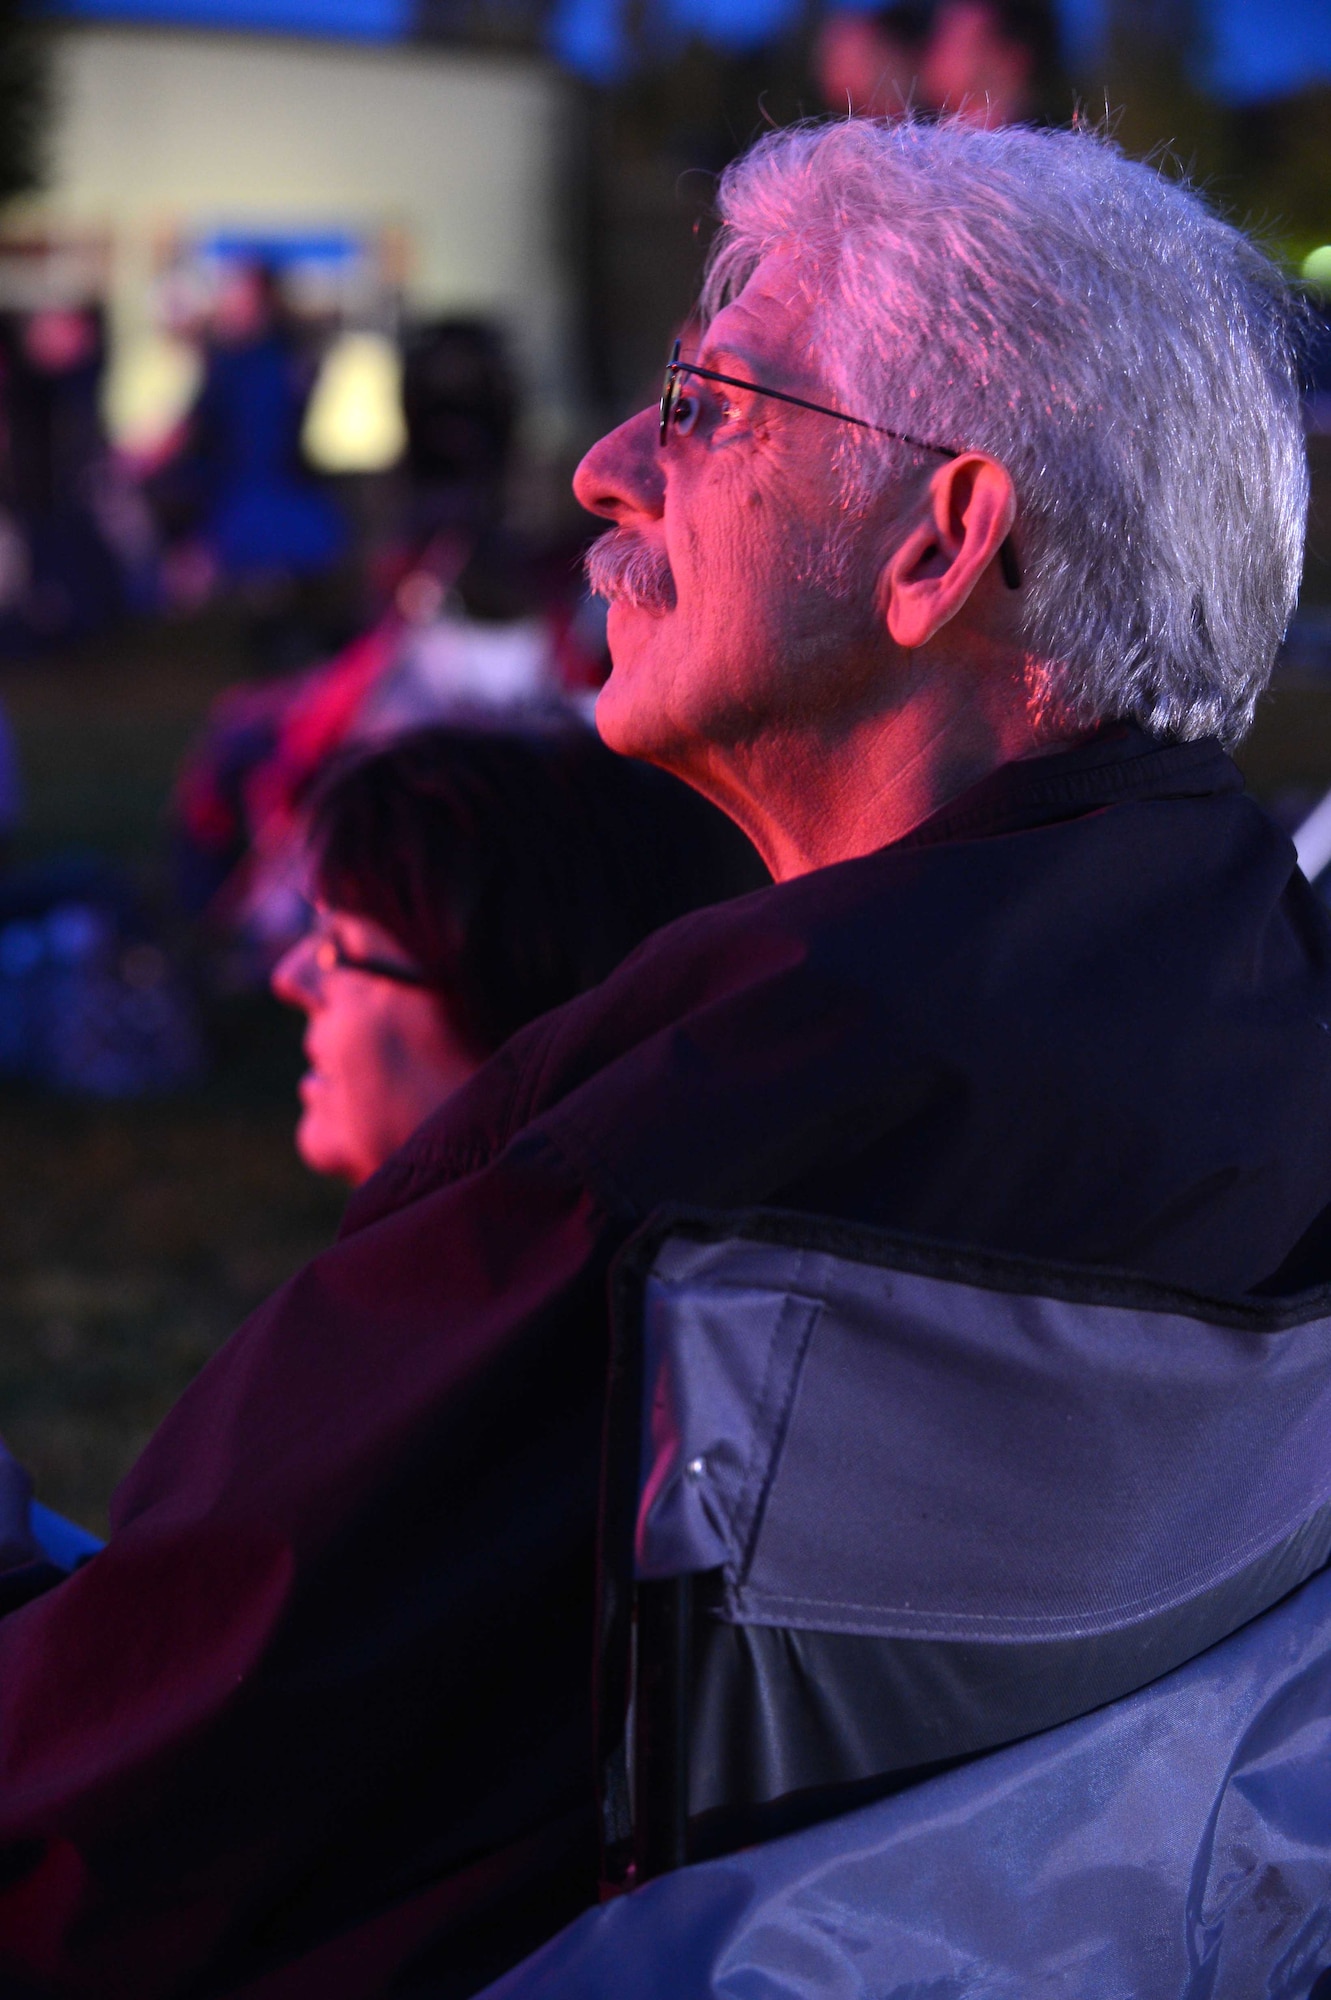 SPANGDAHLEM AIR BASE, Germany –Bruce Miller, an American visitor to the base, watches the firework show July 4, 2013. More than 100 people volunteered to make Super Saber Appreciation Day possible. (U.S. Air Force photo by Airman 1st Class Kyle Gese/Released)